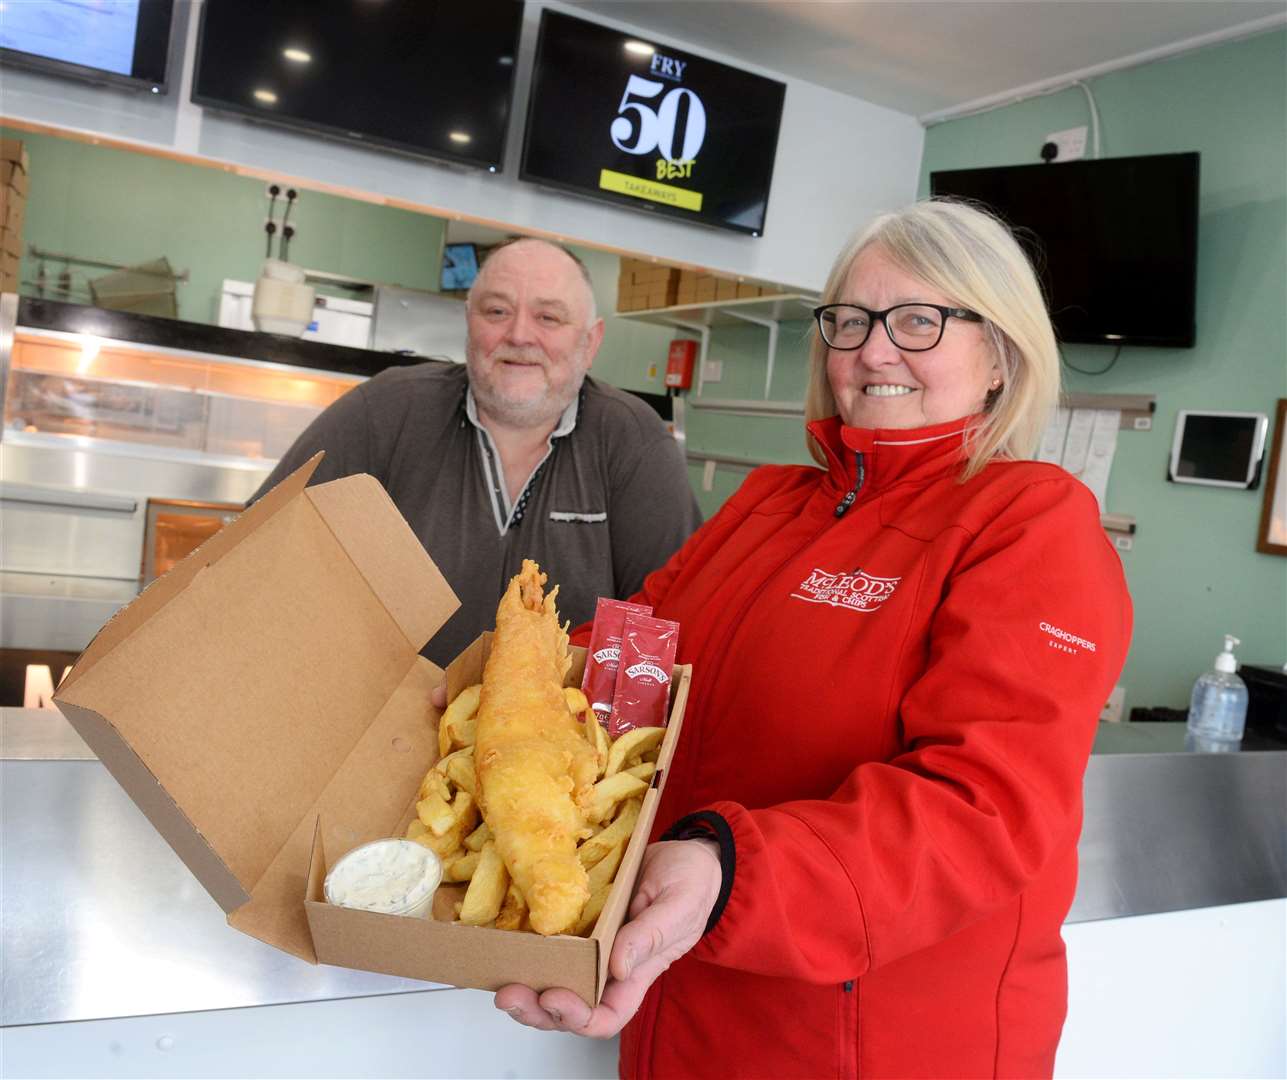 Top 50 takeaways in UK awarded to Mcleod's Fish and Chips Grant Street. Owners David Mcleod and Anne Marie Fraser. Picture: Gary Anthony